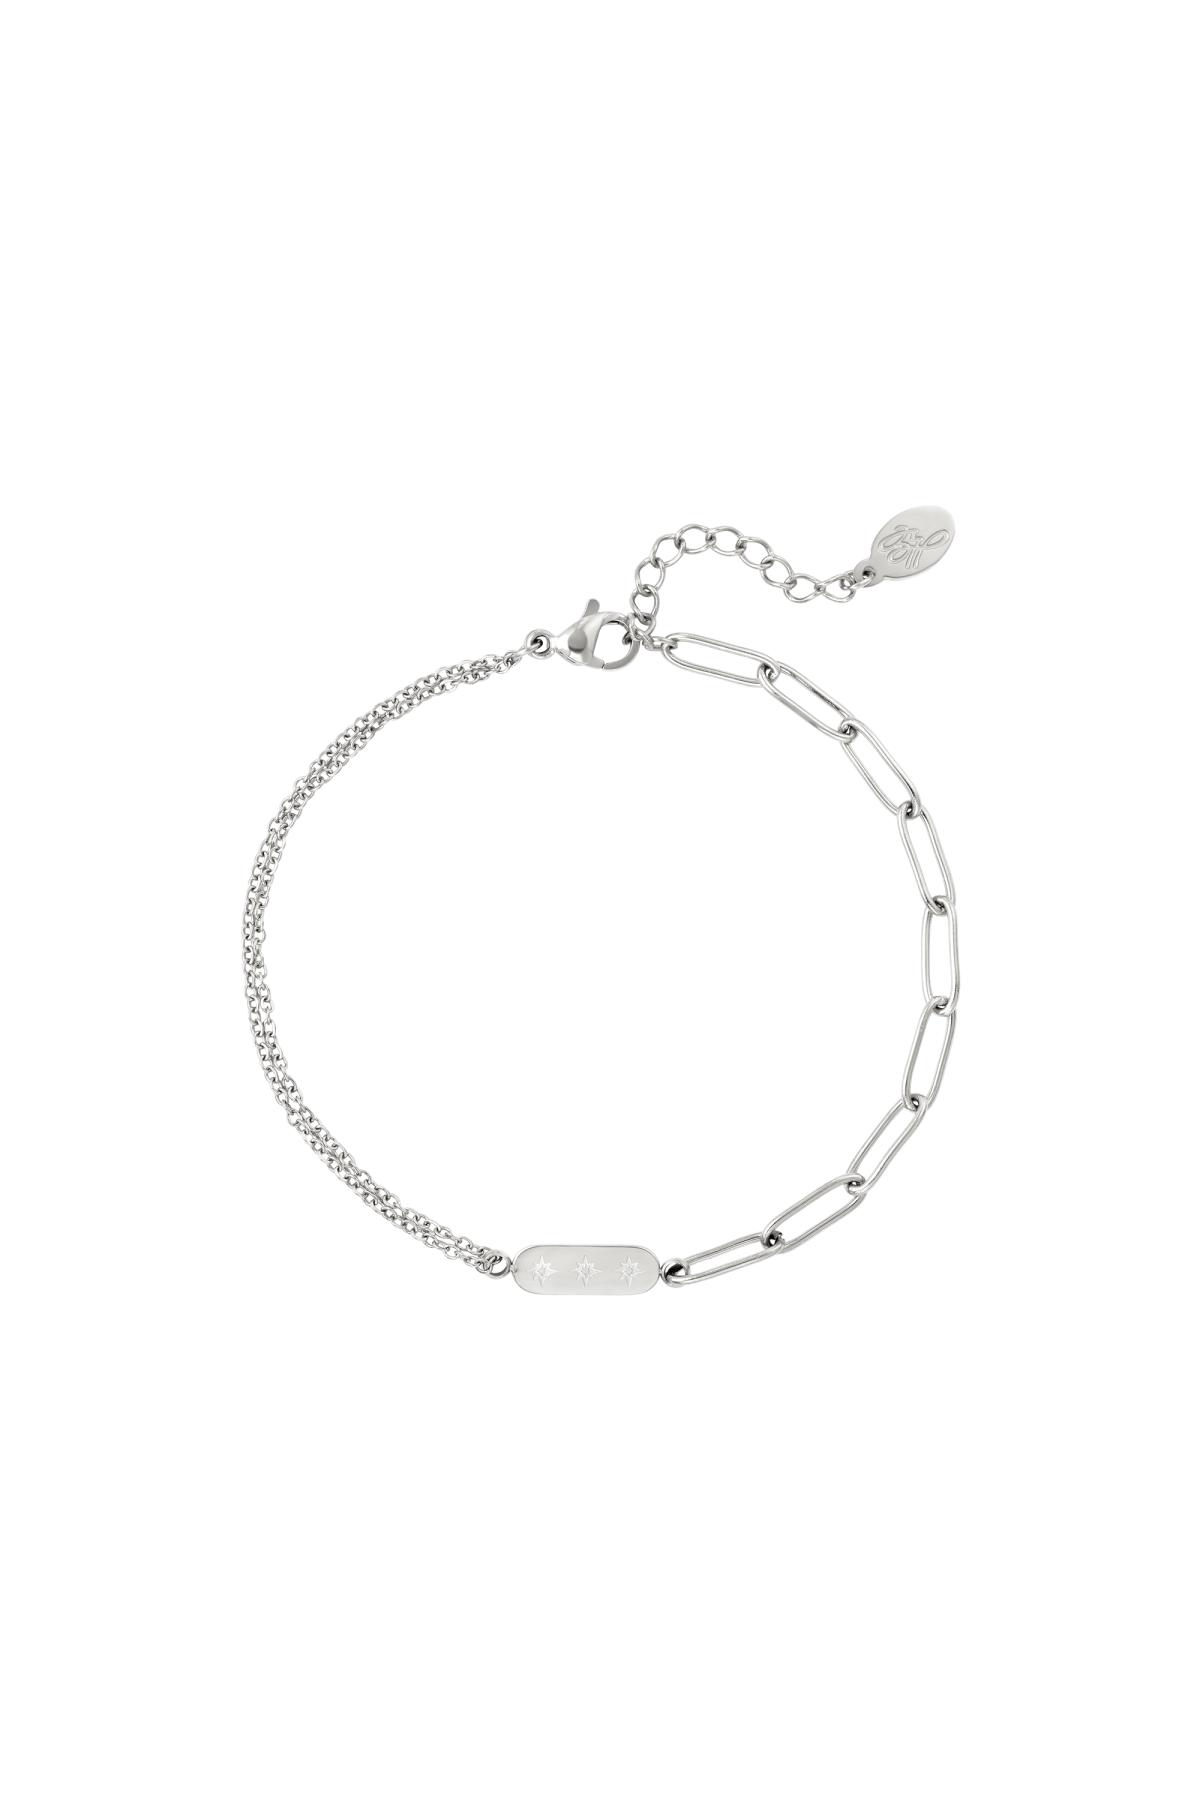 Stainless Steel Bracelet with Double Chain and Charm Silver